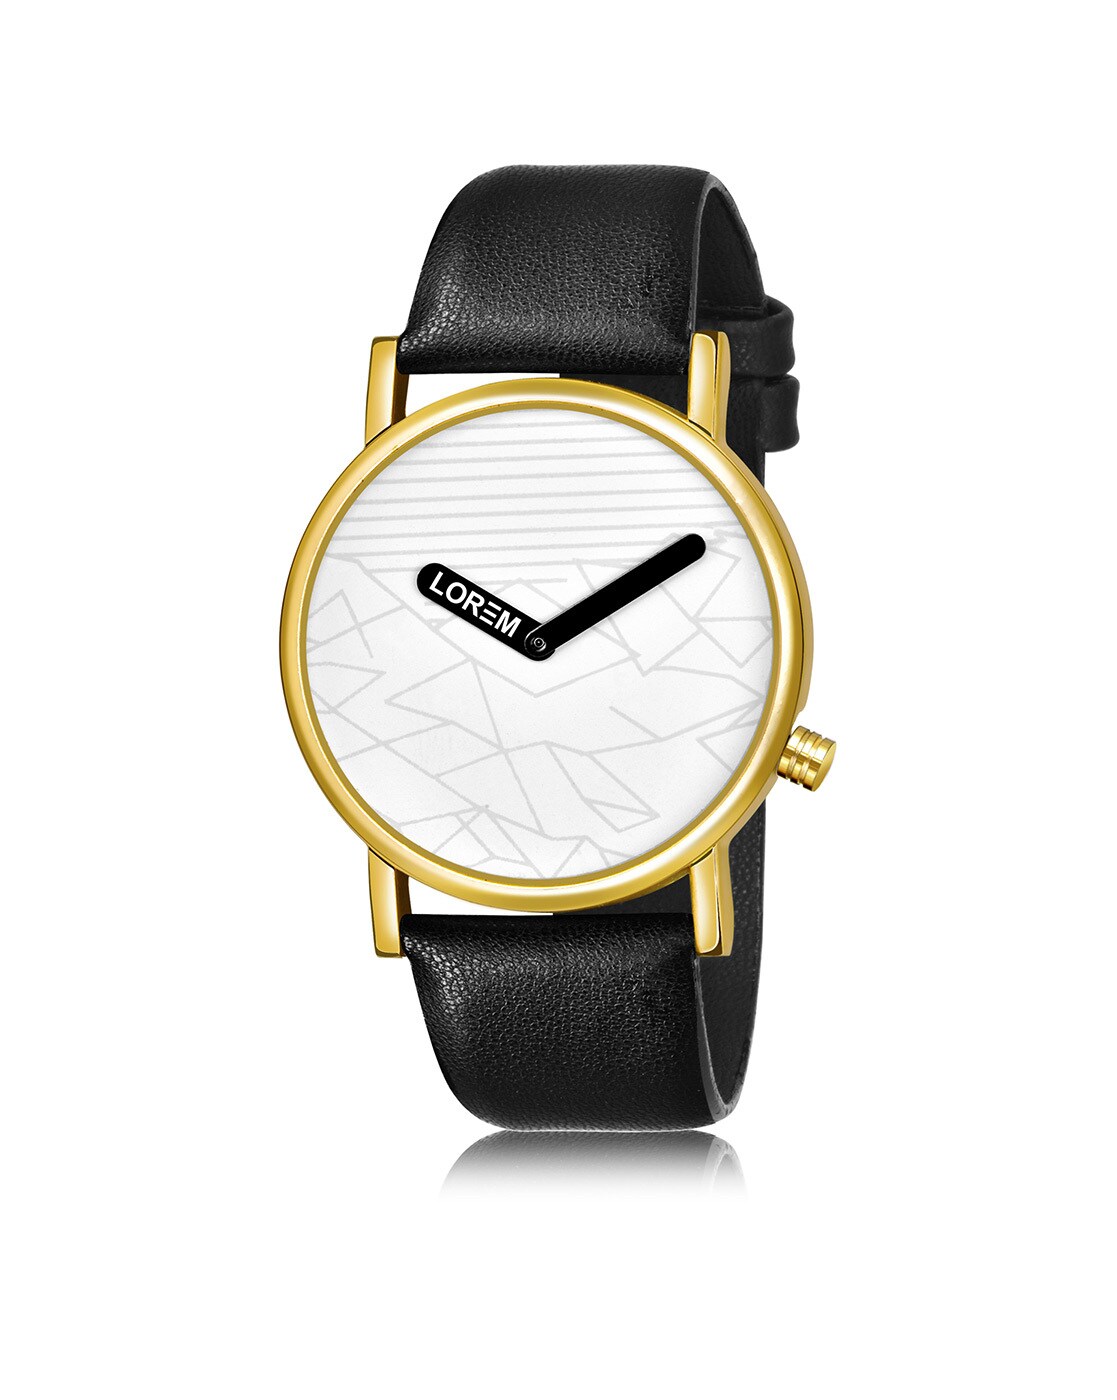 Buy LOREM Stylish Synthetic Leather Black Dial Round Watch for Women-LR340  at Amazon.in